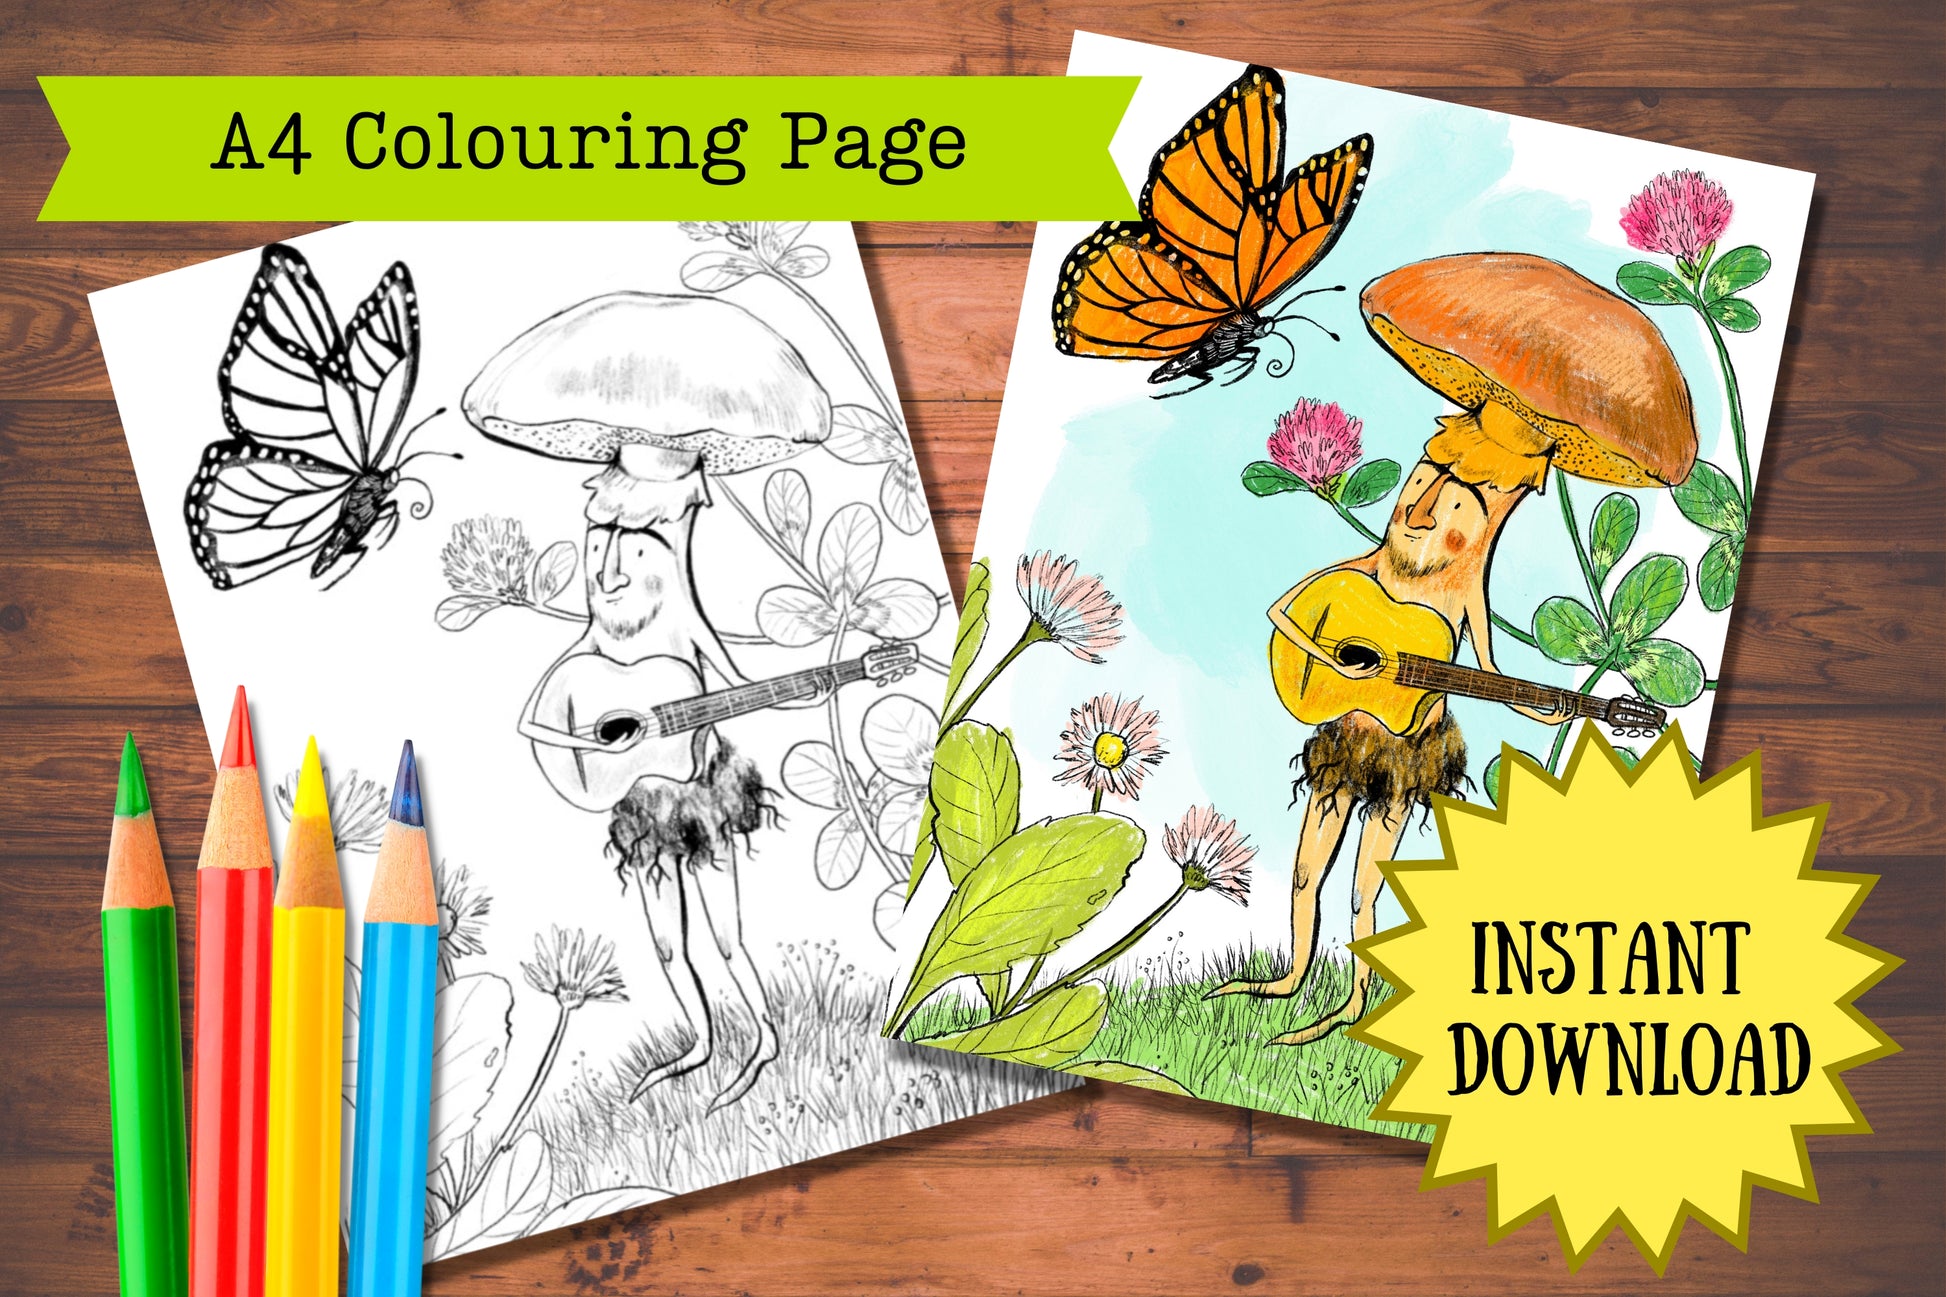 Anna Seed Art | Printable Colouring Page - Serenade to a Butterfly (DIGITAL DOWNLOAD)